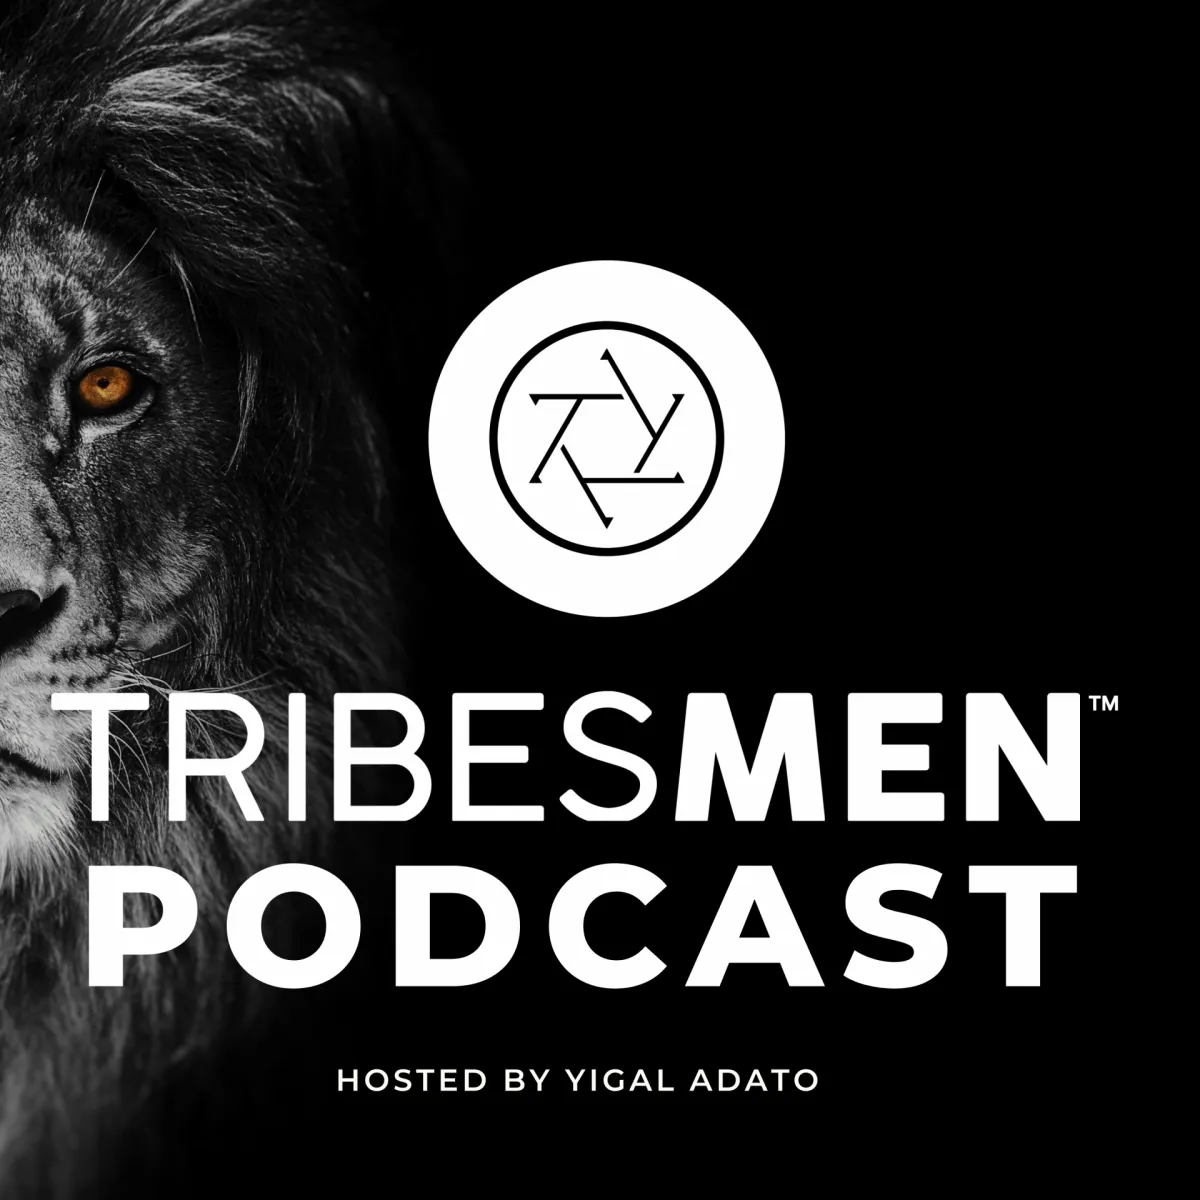 Tribesmen Podcast Episode1 with Yigal Adato